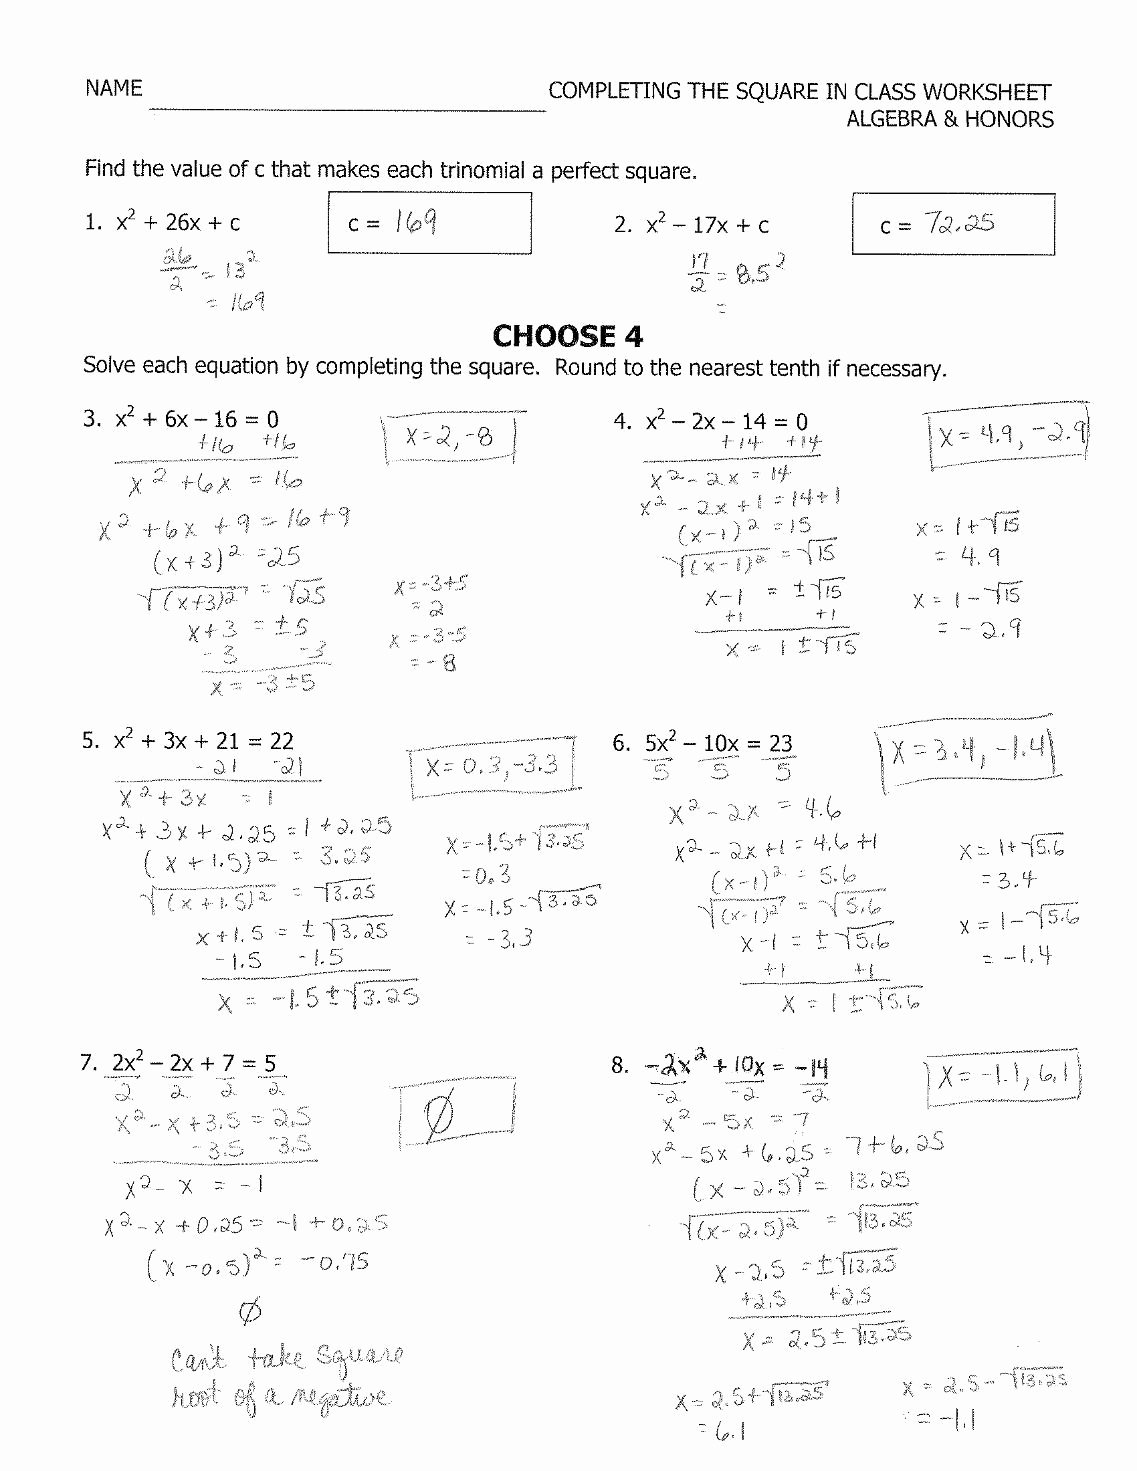 Completing the Square Worksheet Elegant solve Quadratic Equations by Pleting the Square Maze